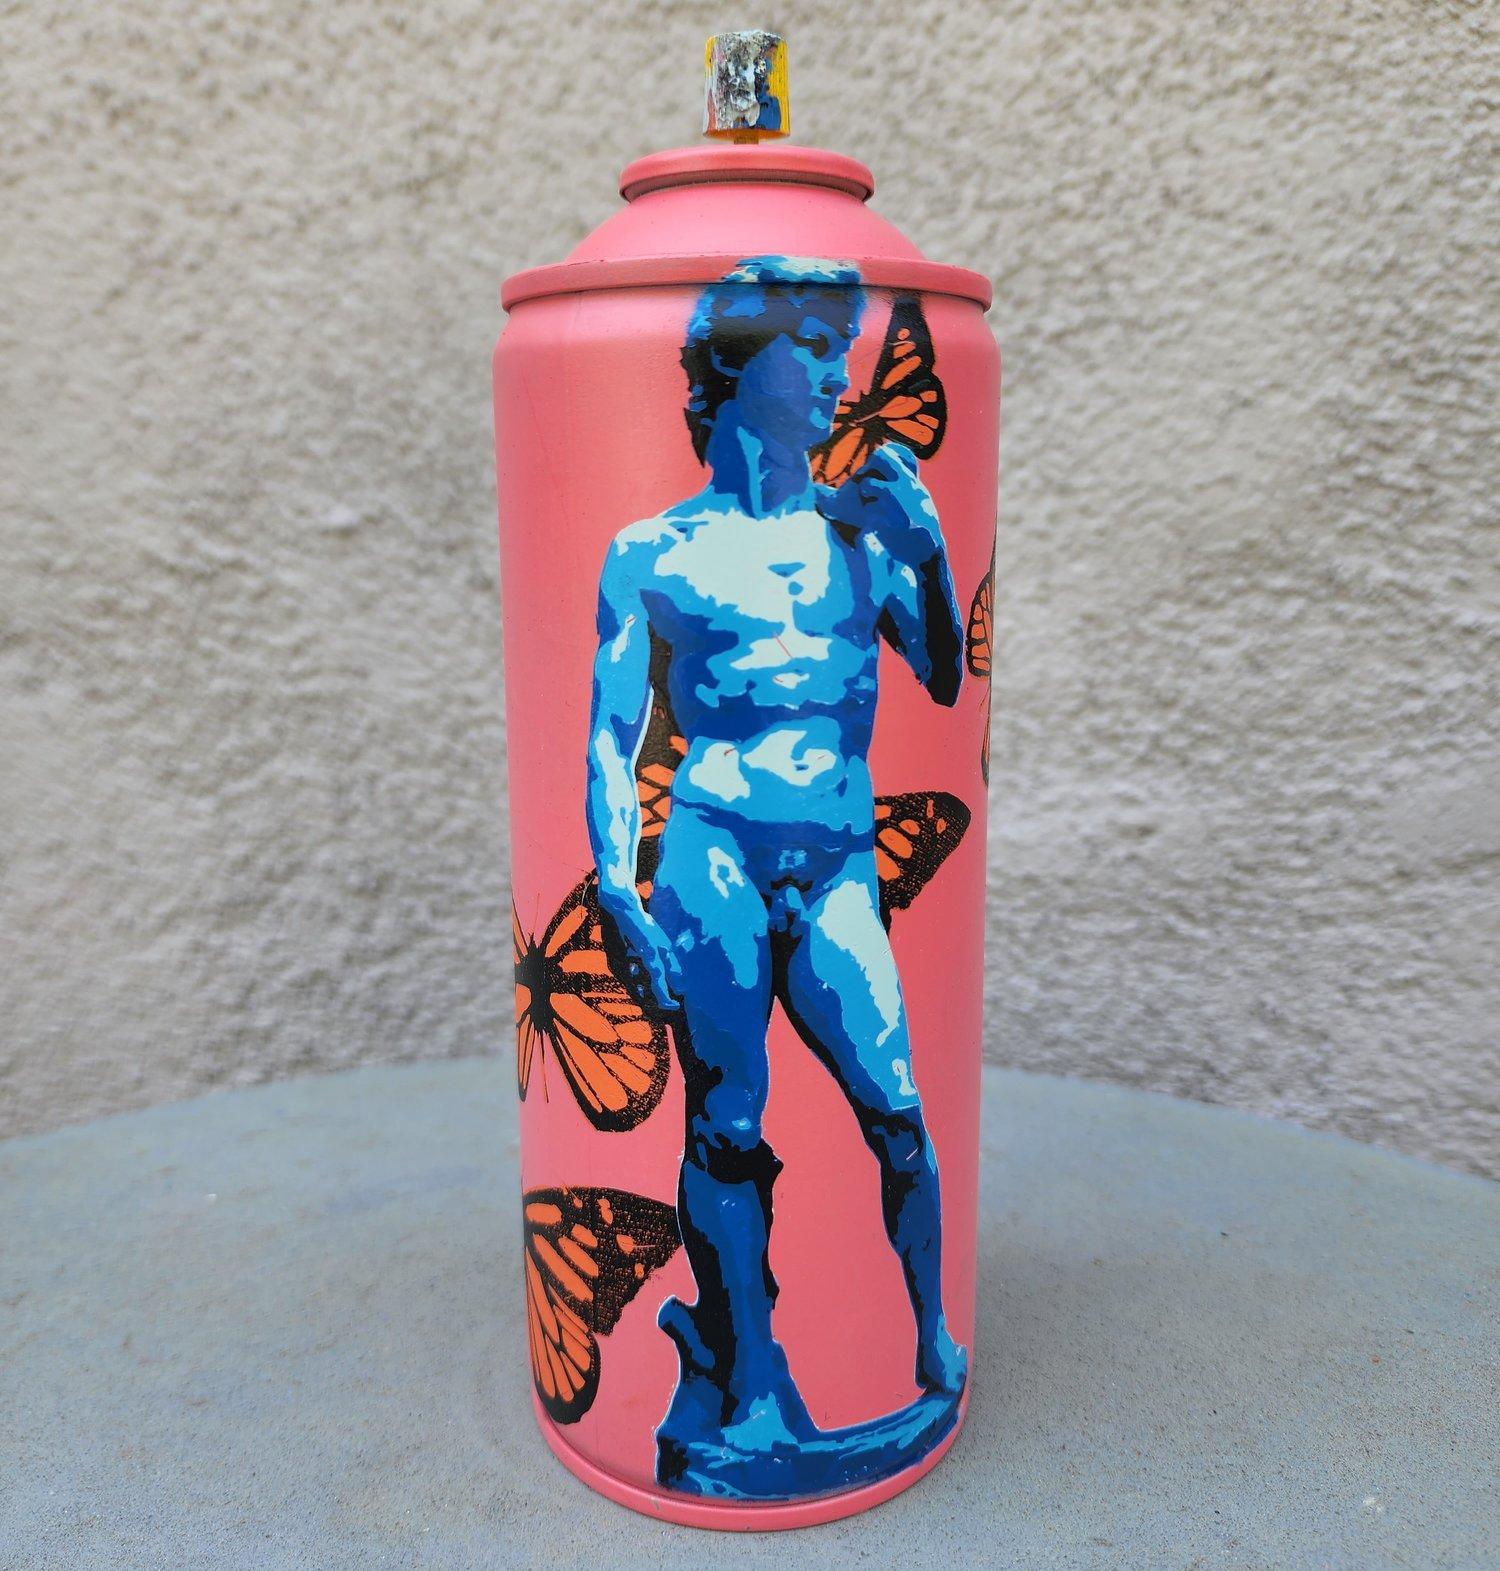 Spray Paint on Repurposed Can

Open Edition

Each can is hand painted so each one will vary slightly